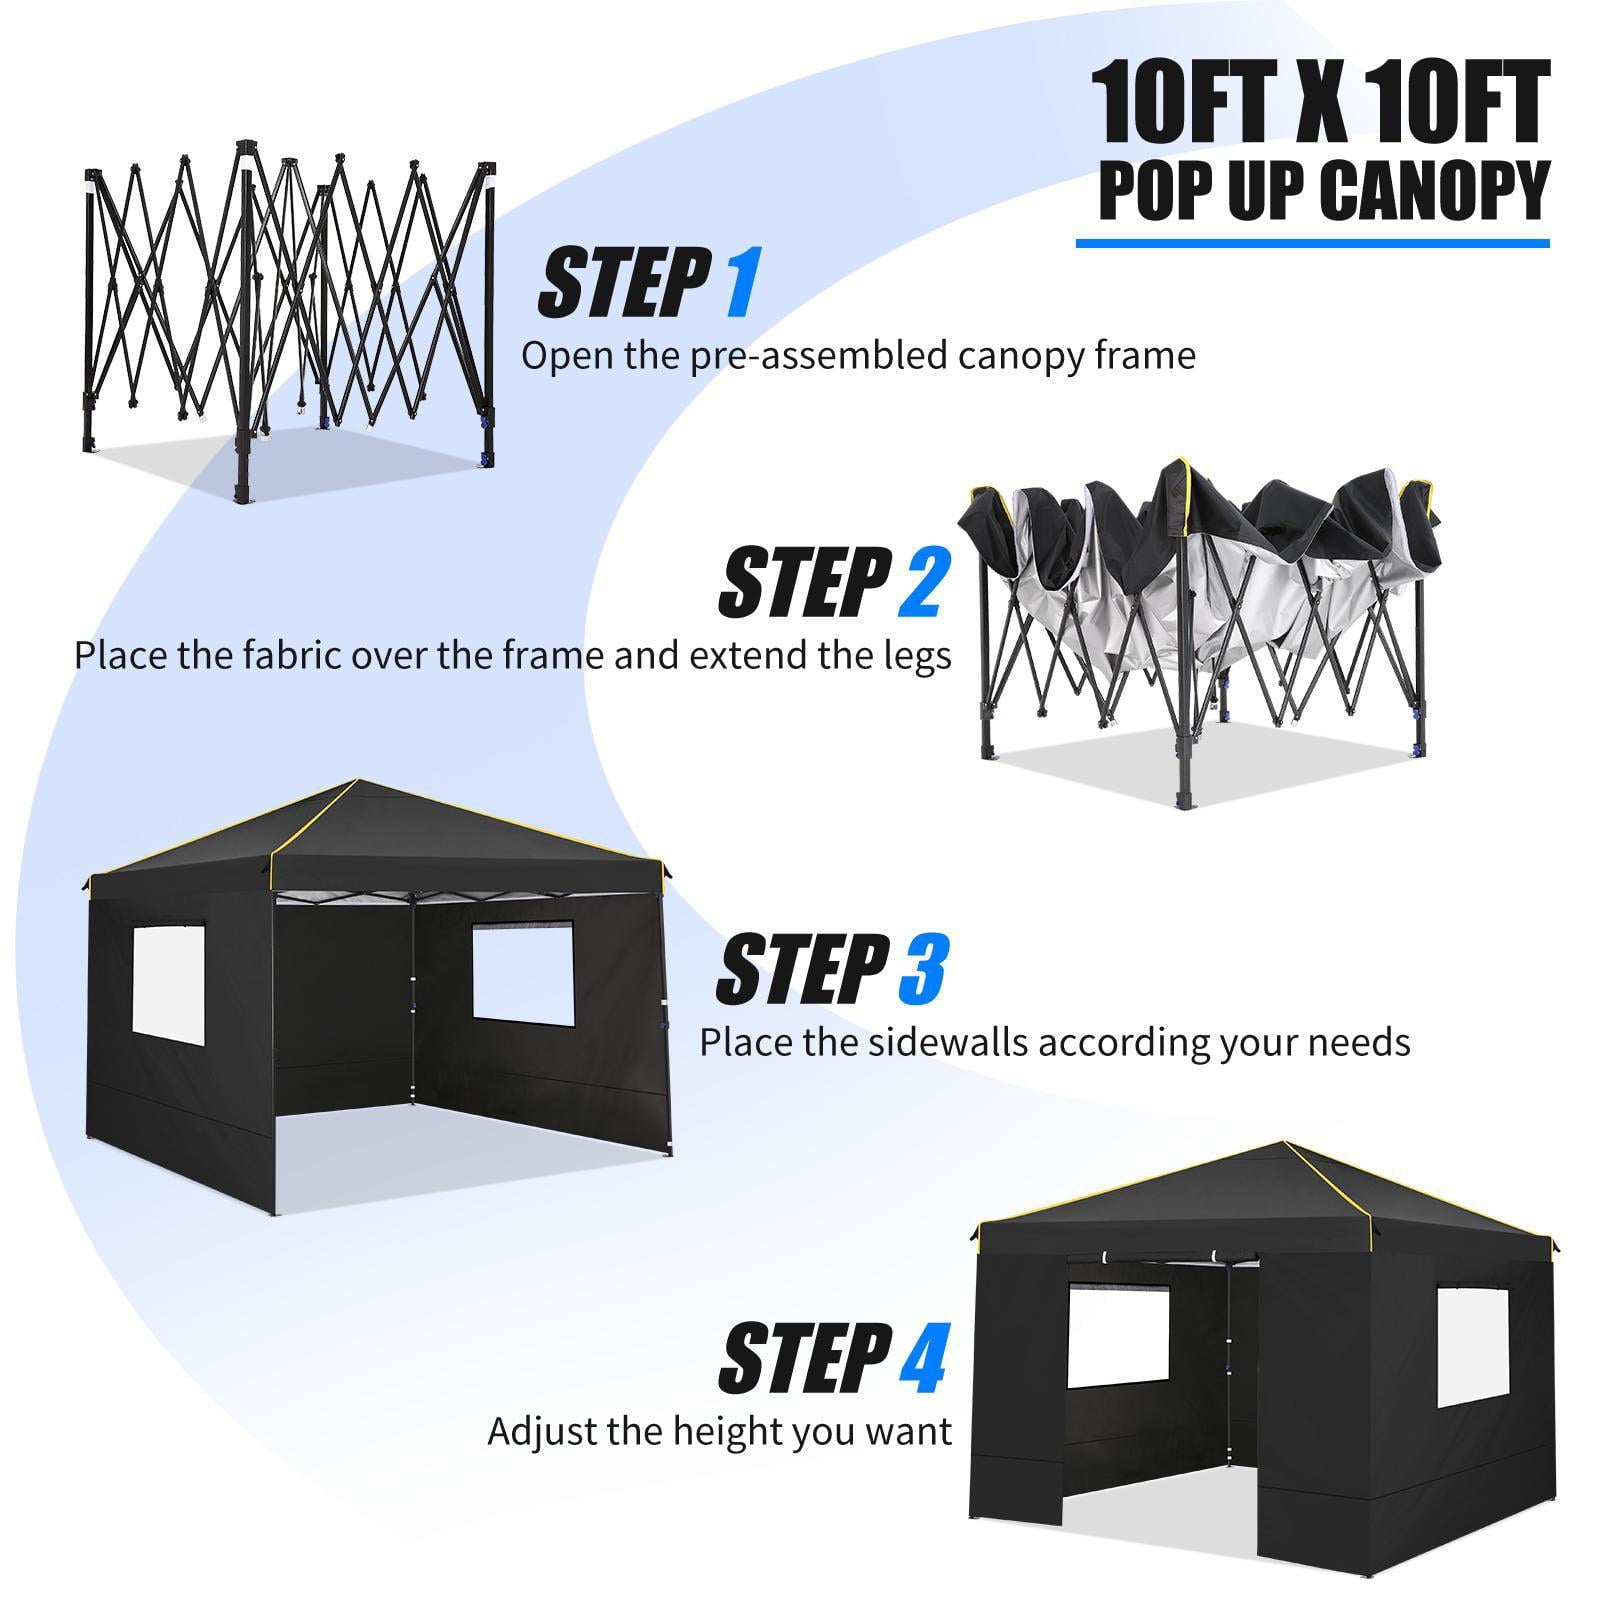 Likein 10x10 Pop Up Canopy Tent with 4 Removable Sidewalls, Waterproof Commercial Instant Gazebo Tent Outdoor Canopy Tents for Party/Exhibition/Picnic with Carry Bag, 4 Stakes and Ropes (Black)